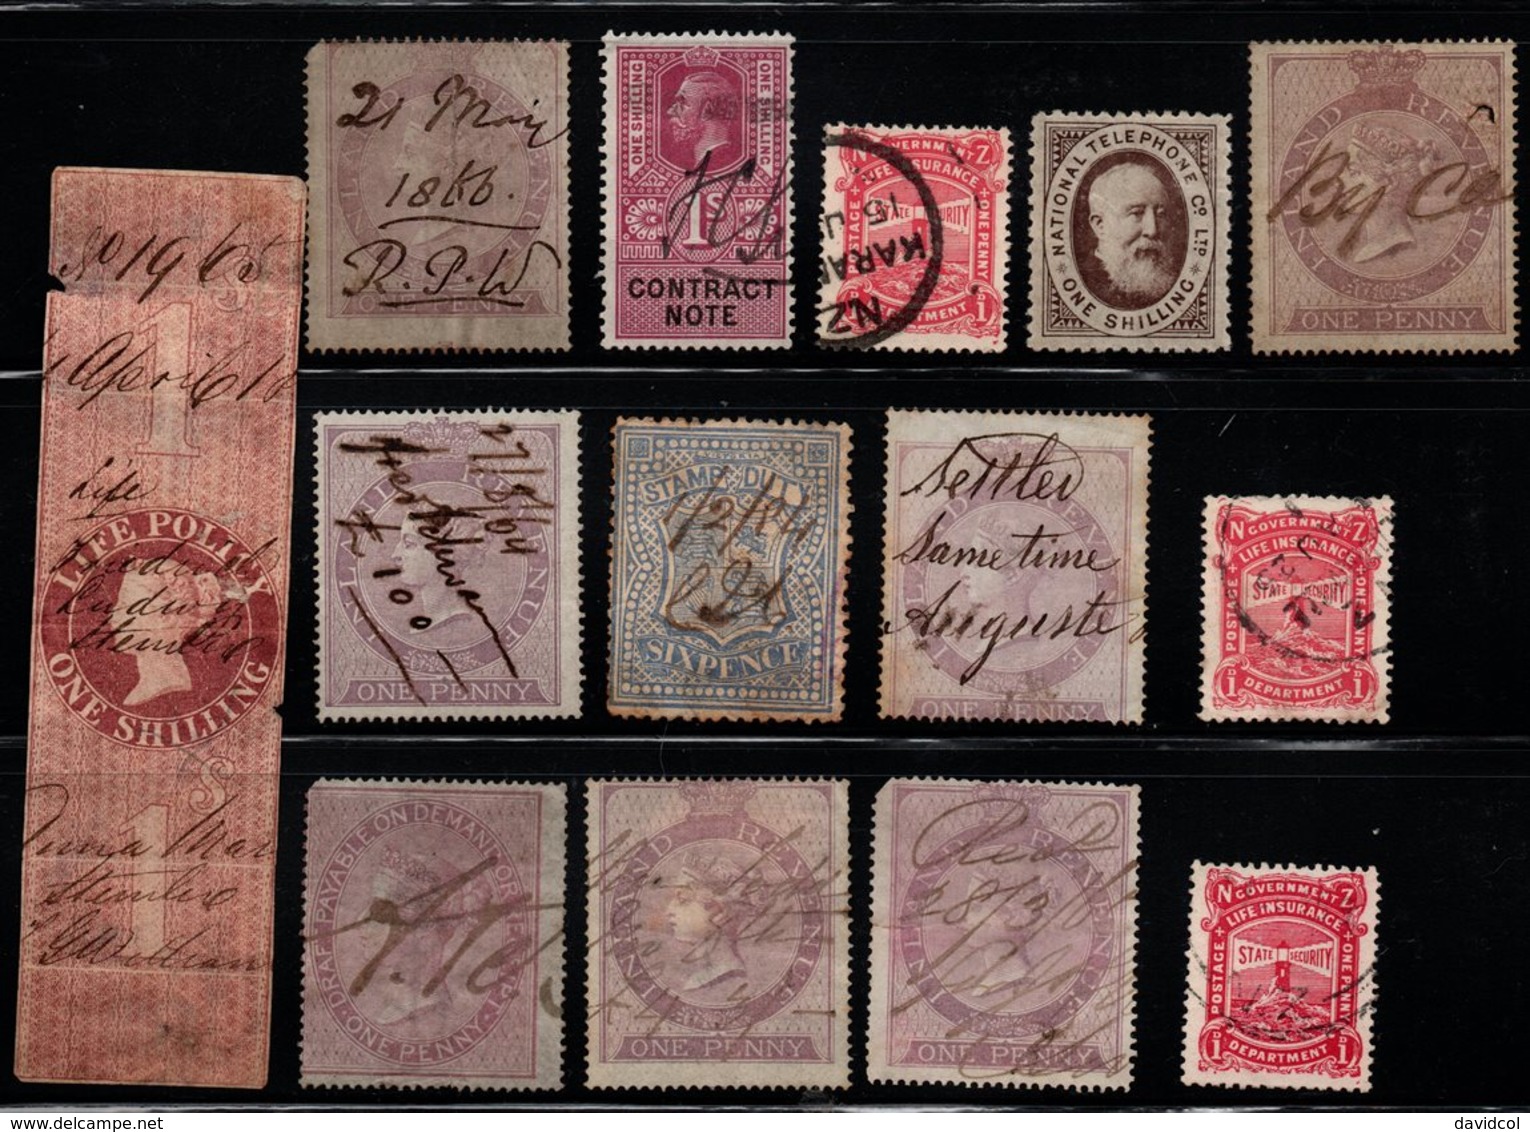 R809 - GREAT BRITAIN. " REVENUES-TELEPHONE-STAM DUTY-INSURANCE " - USED - LOT X 14 STAMPS - SHADES - - Steuermarken